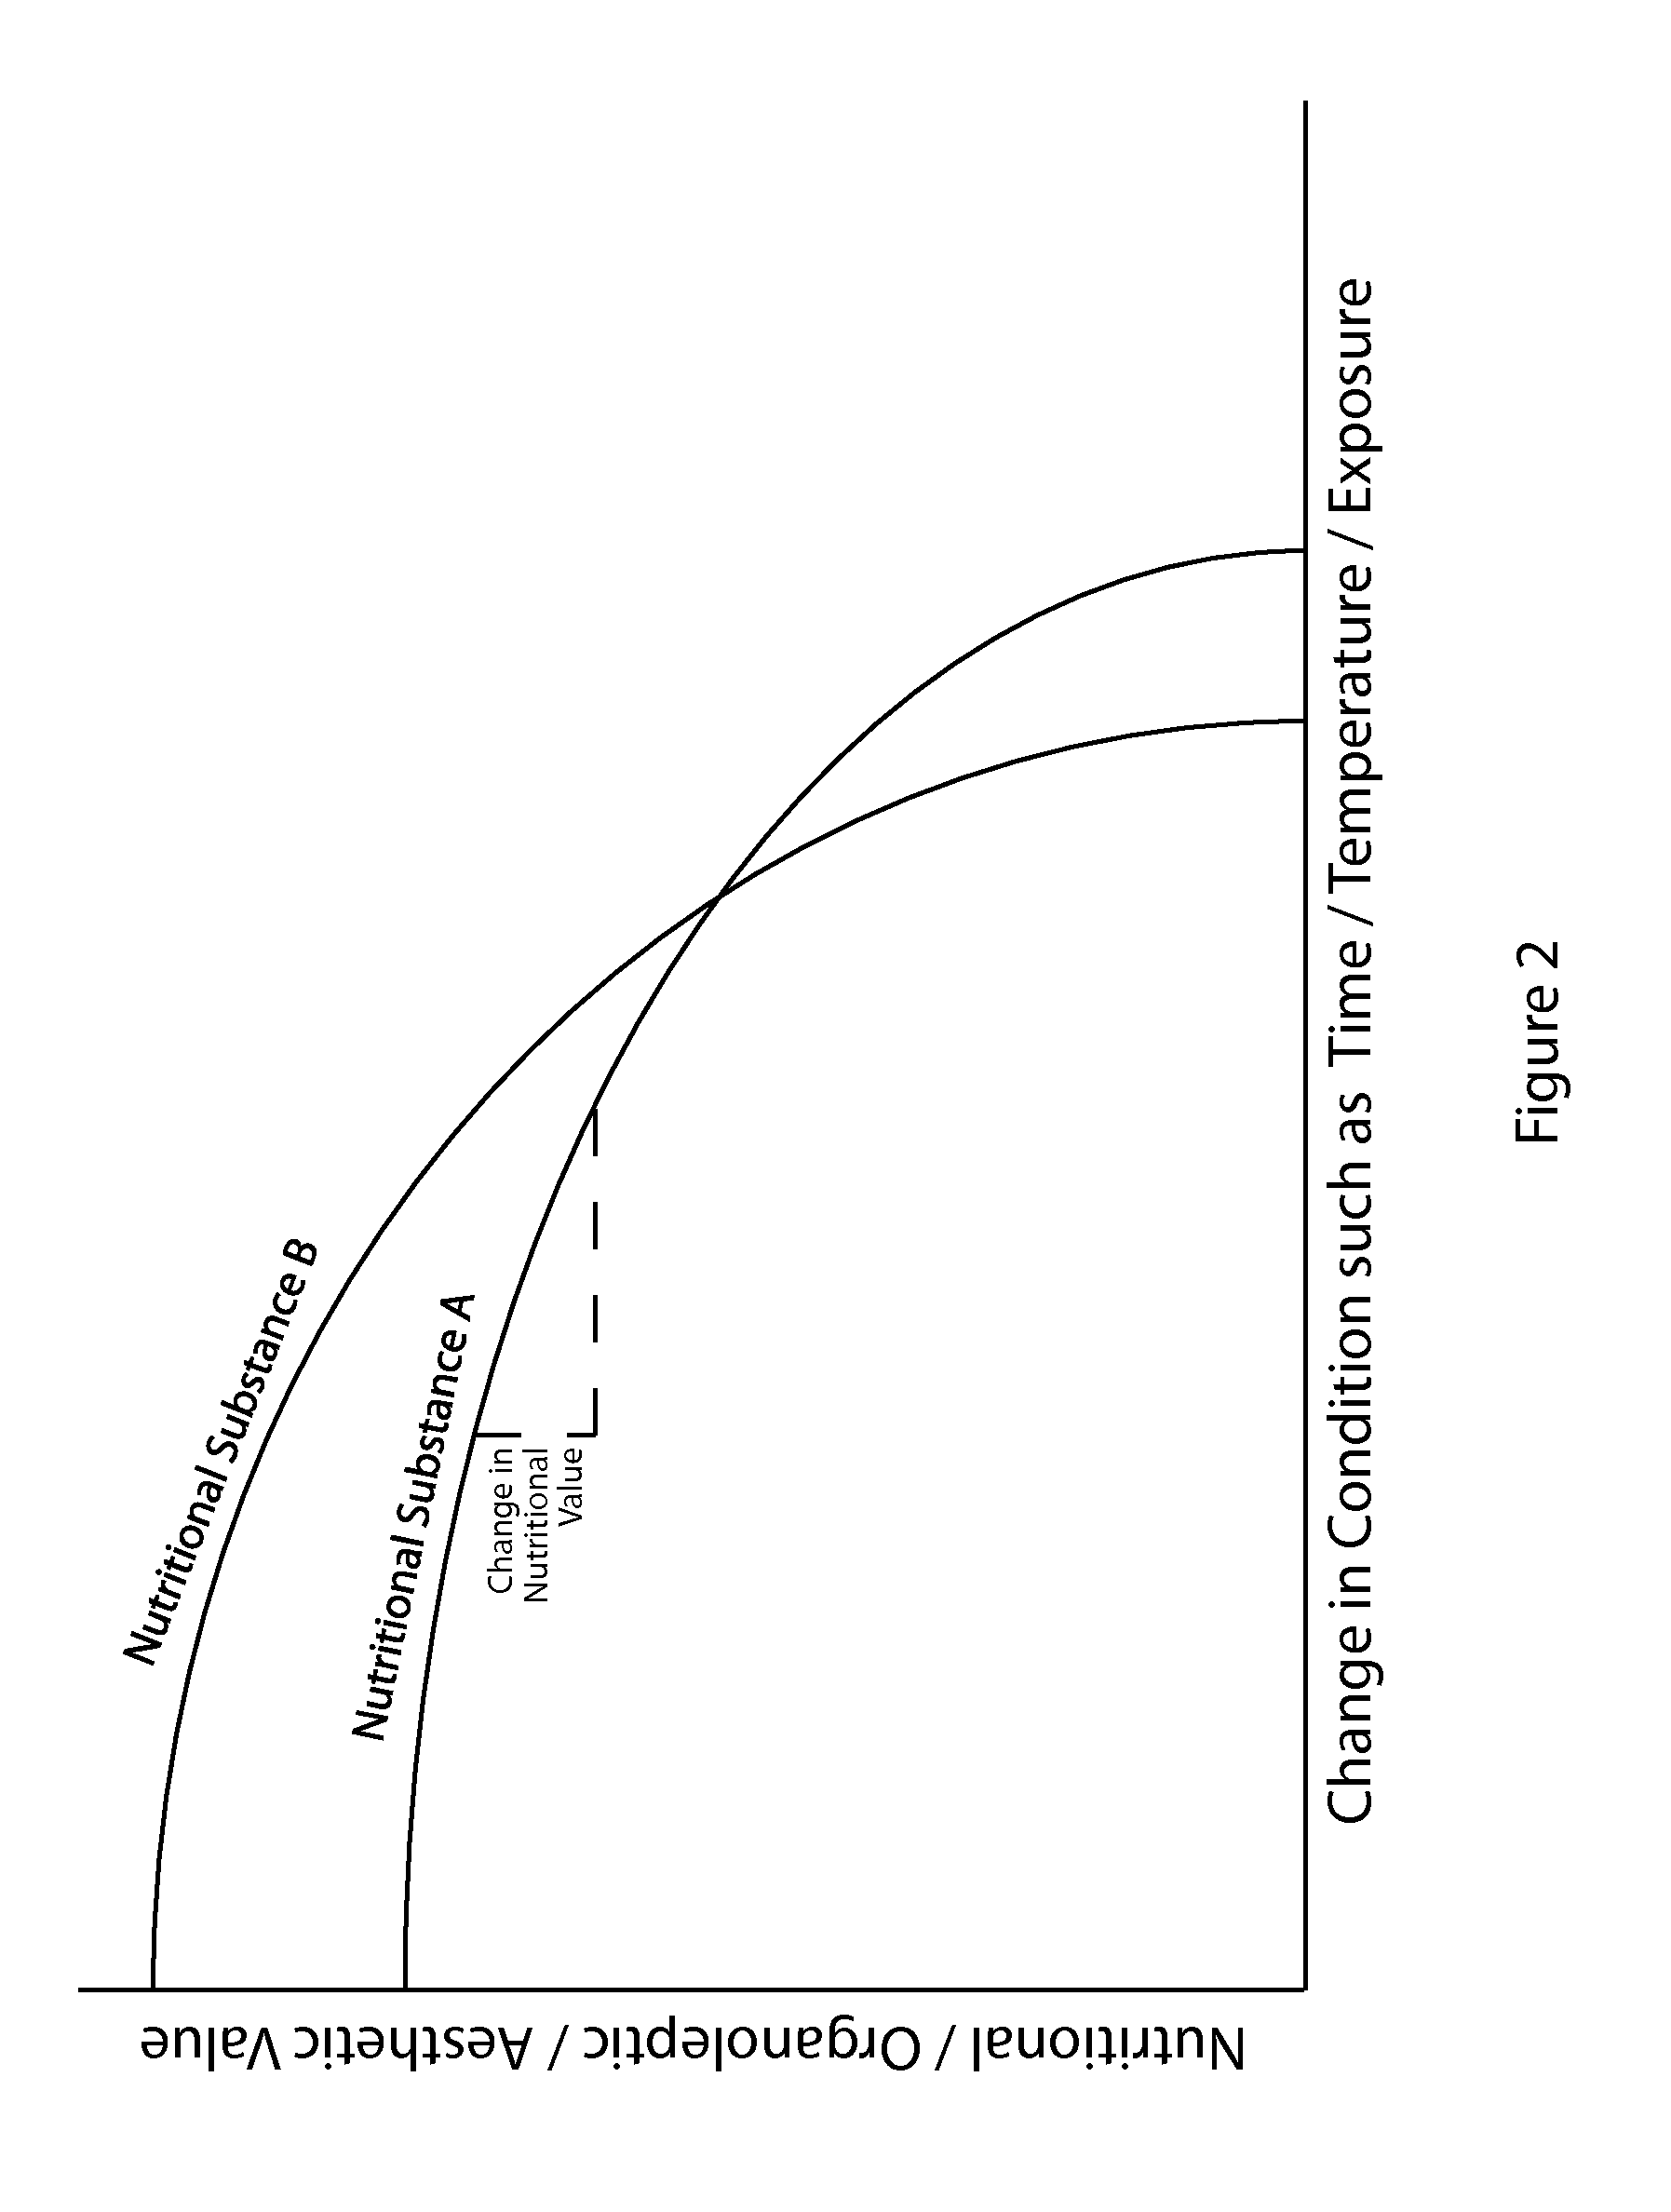 System for Managing the Nutritional Content for Nutritional Substances